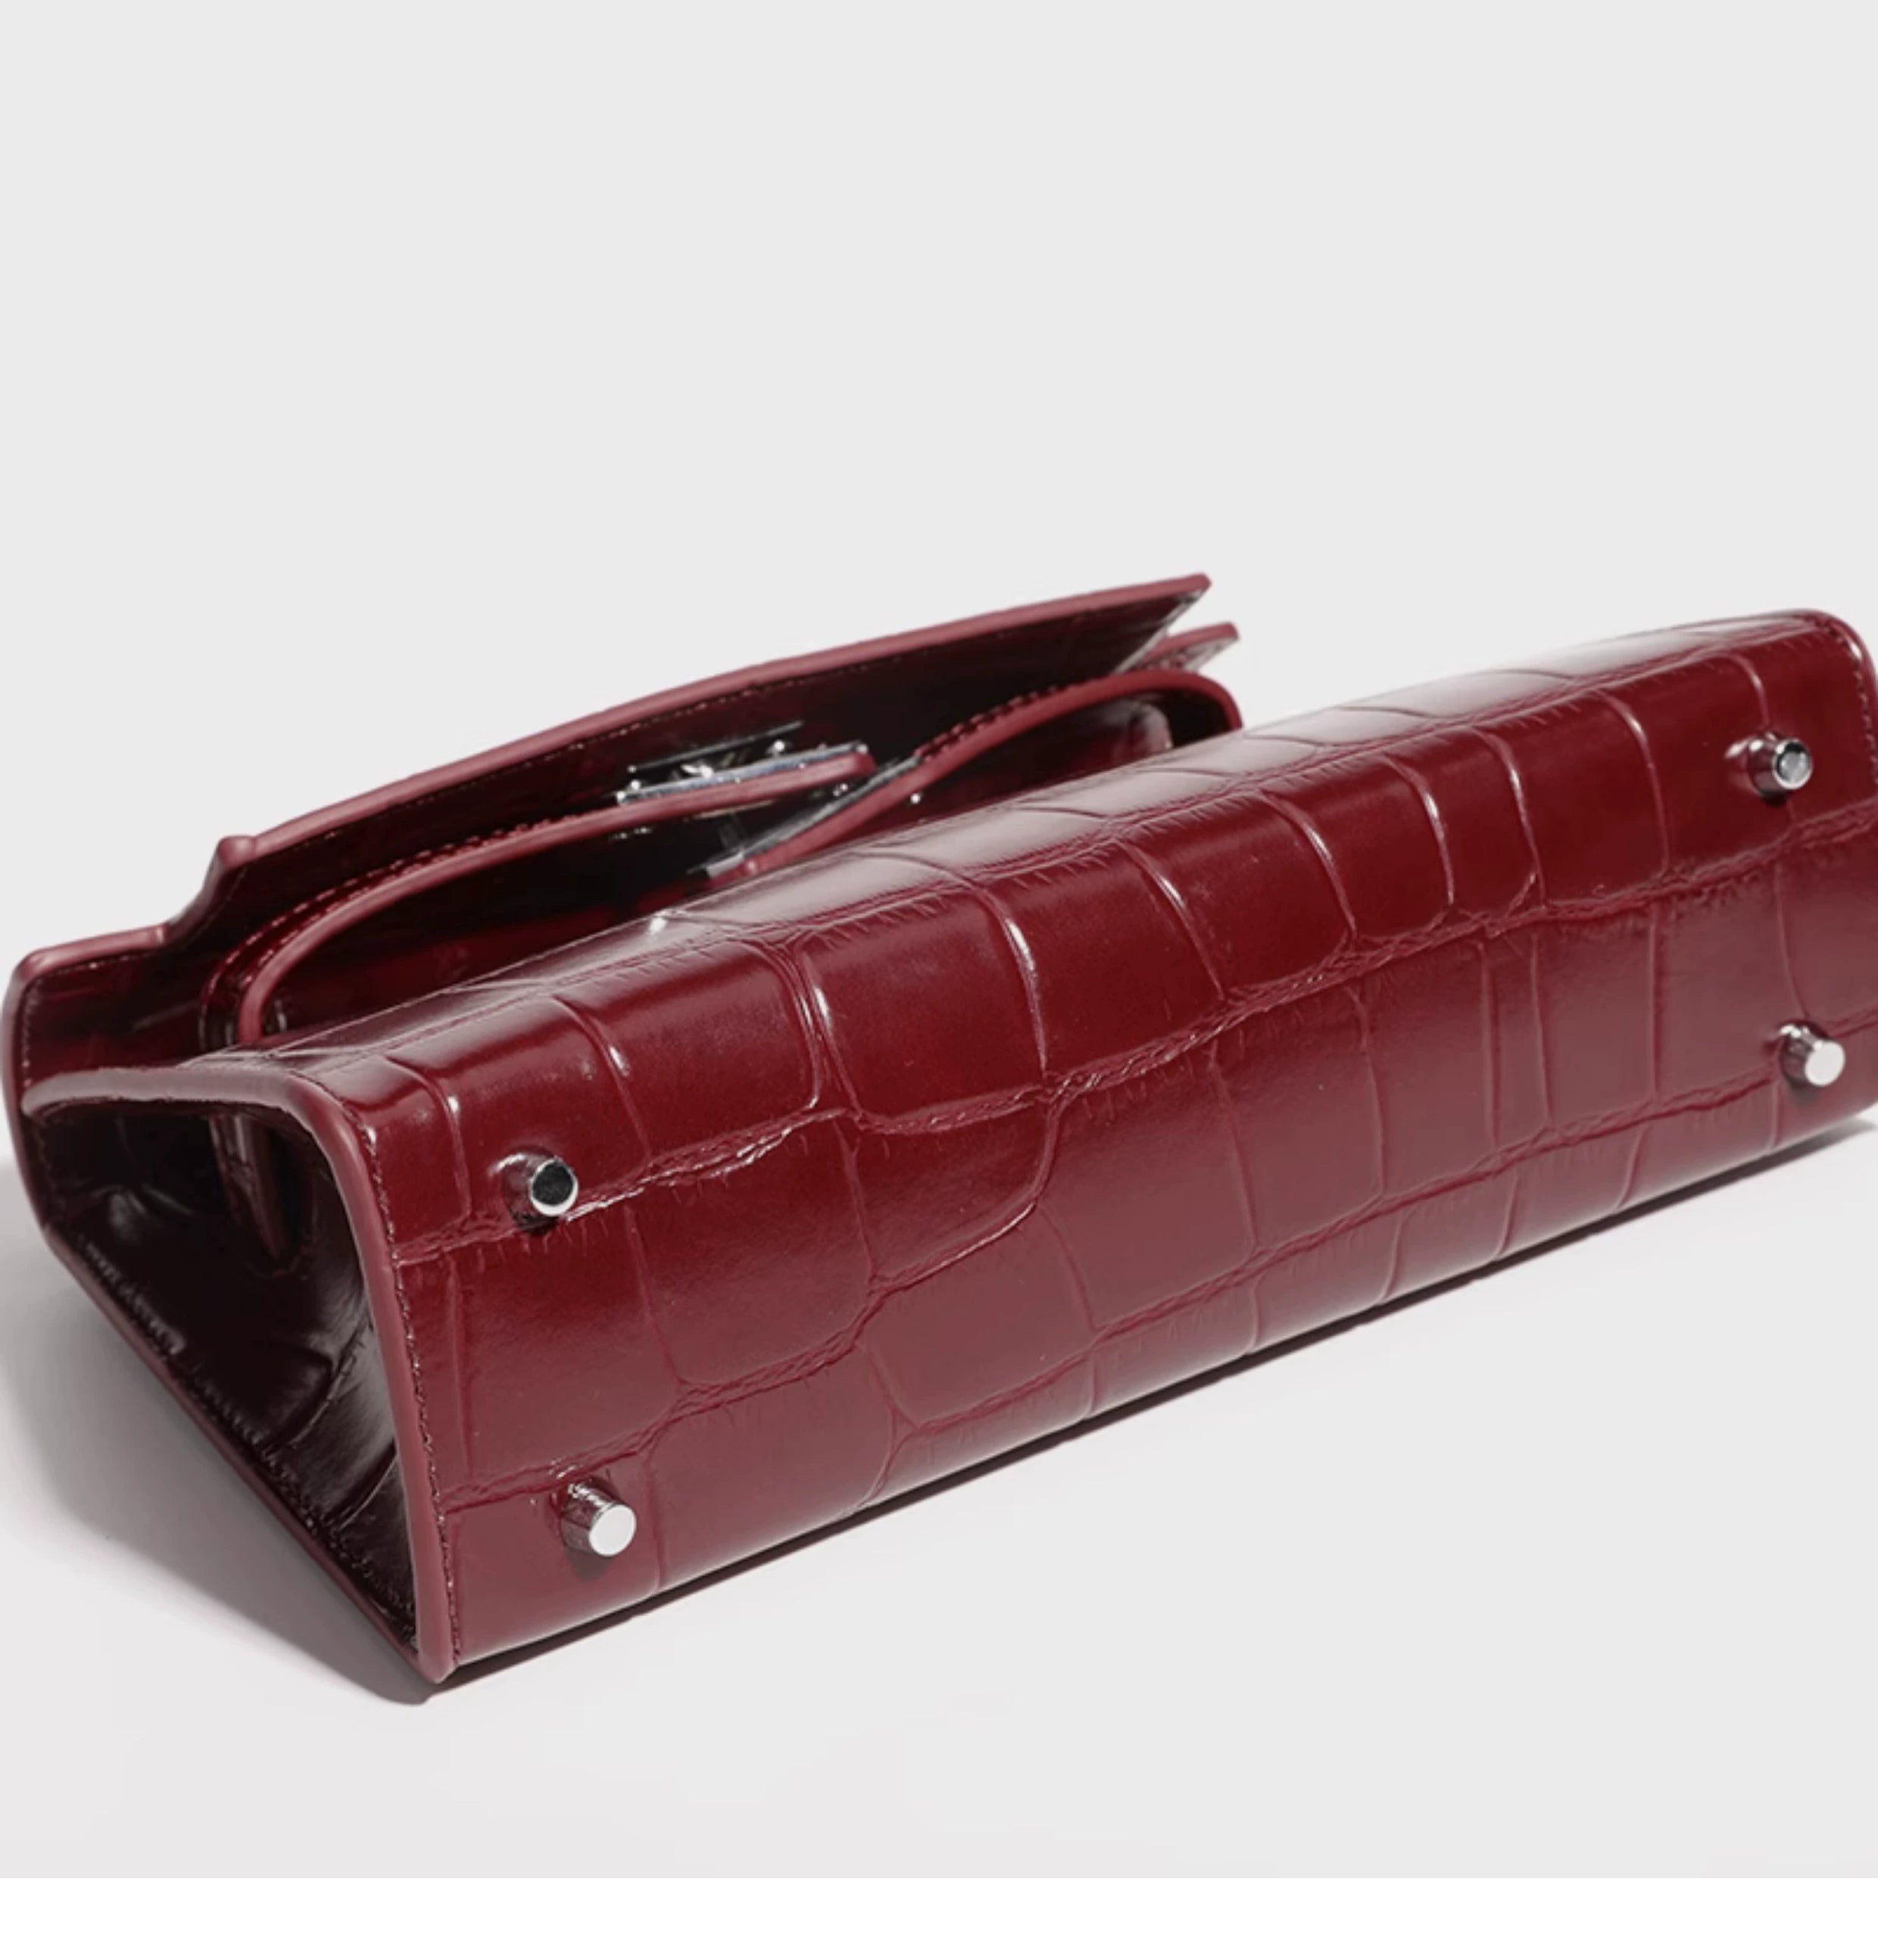 Crocodile Patterned Leather Square Handbag in Red